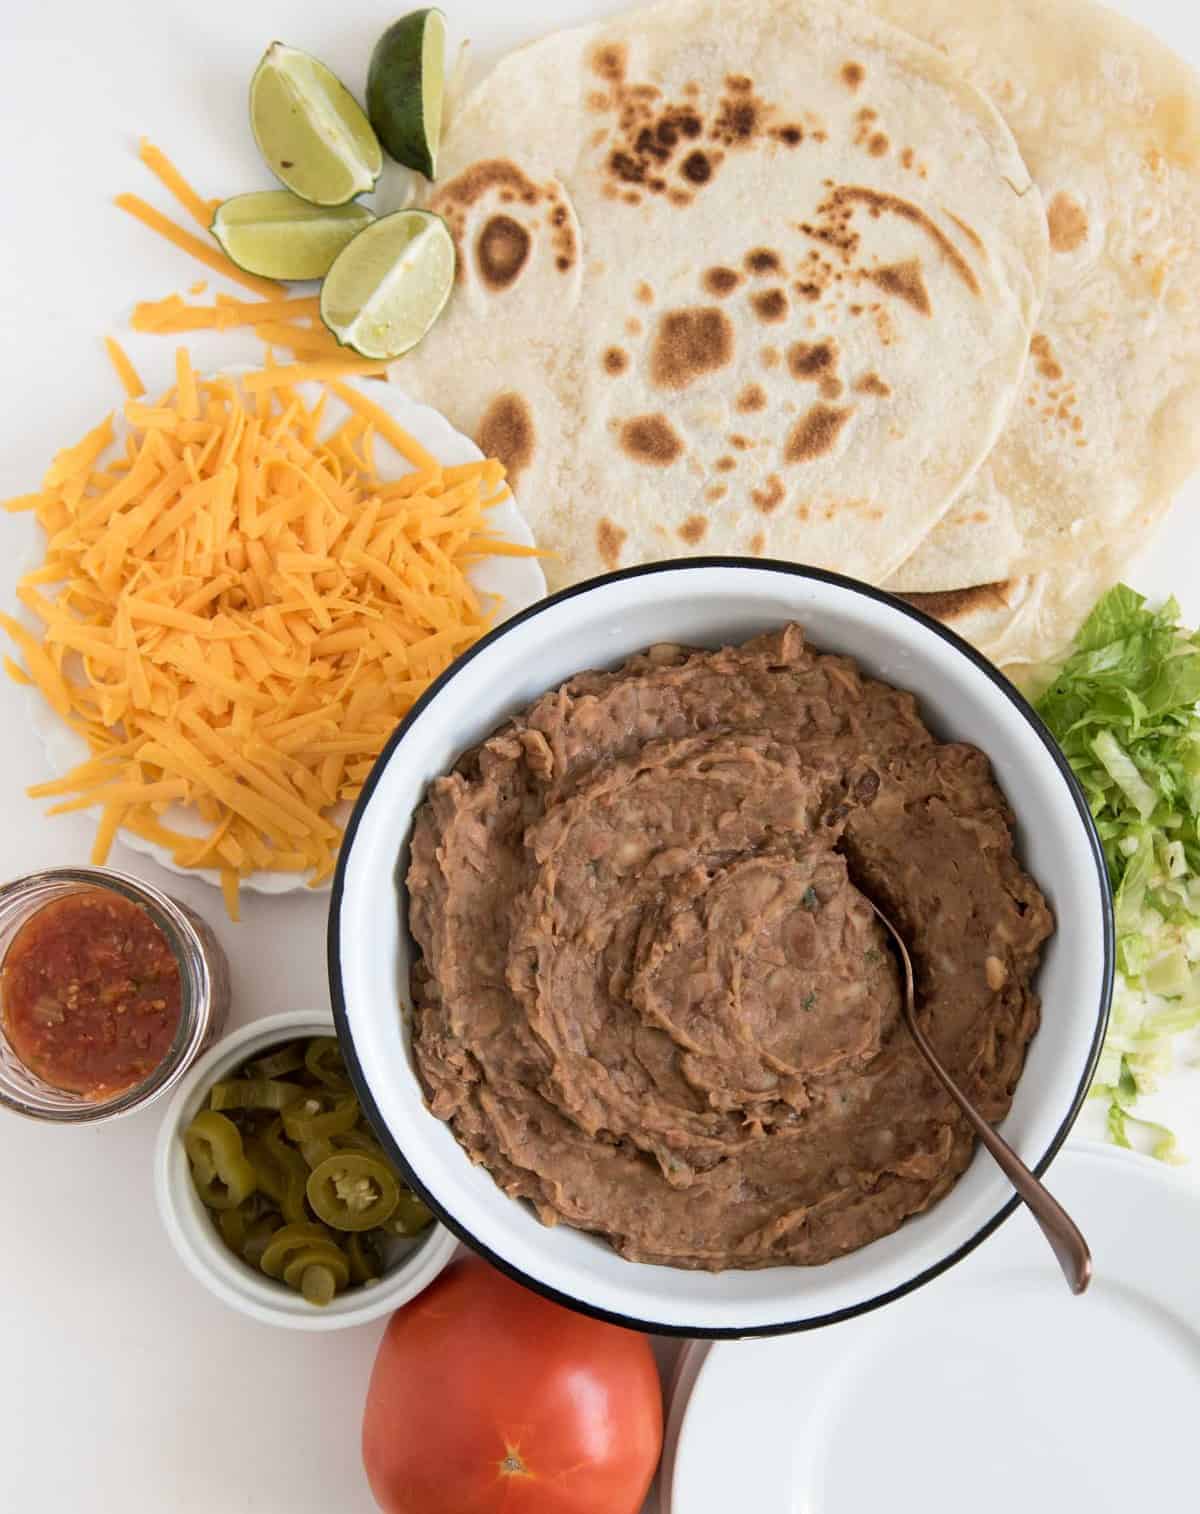 Slow cooker refried beans are the simplest way to make rich and hearty refried beans at home - they are worlds above their canned counterparts.